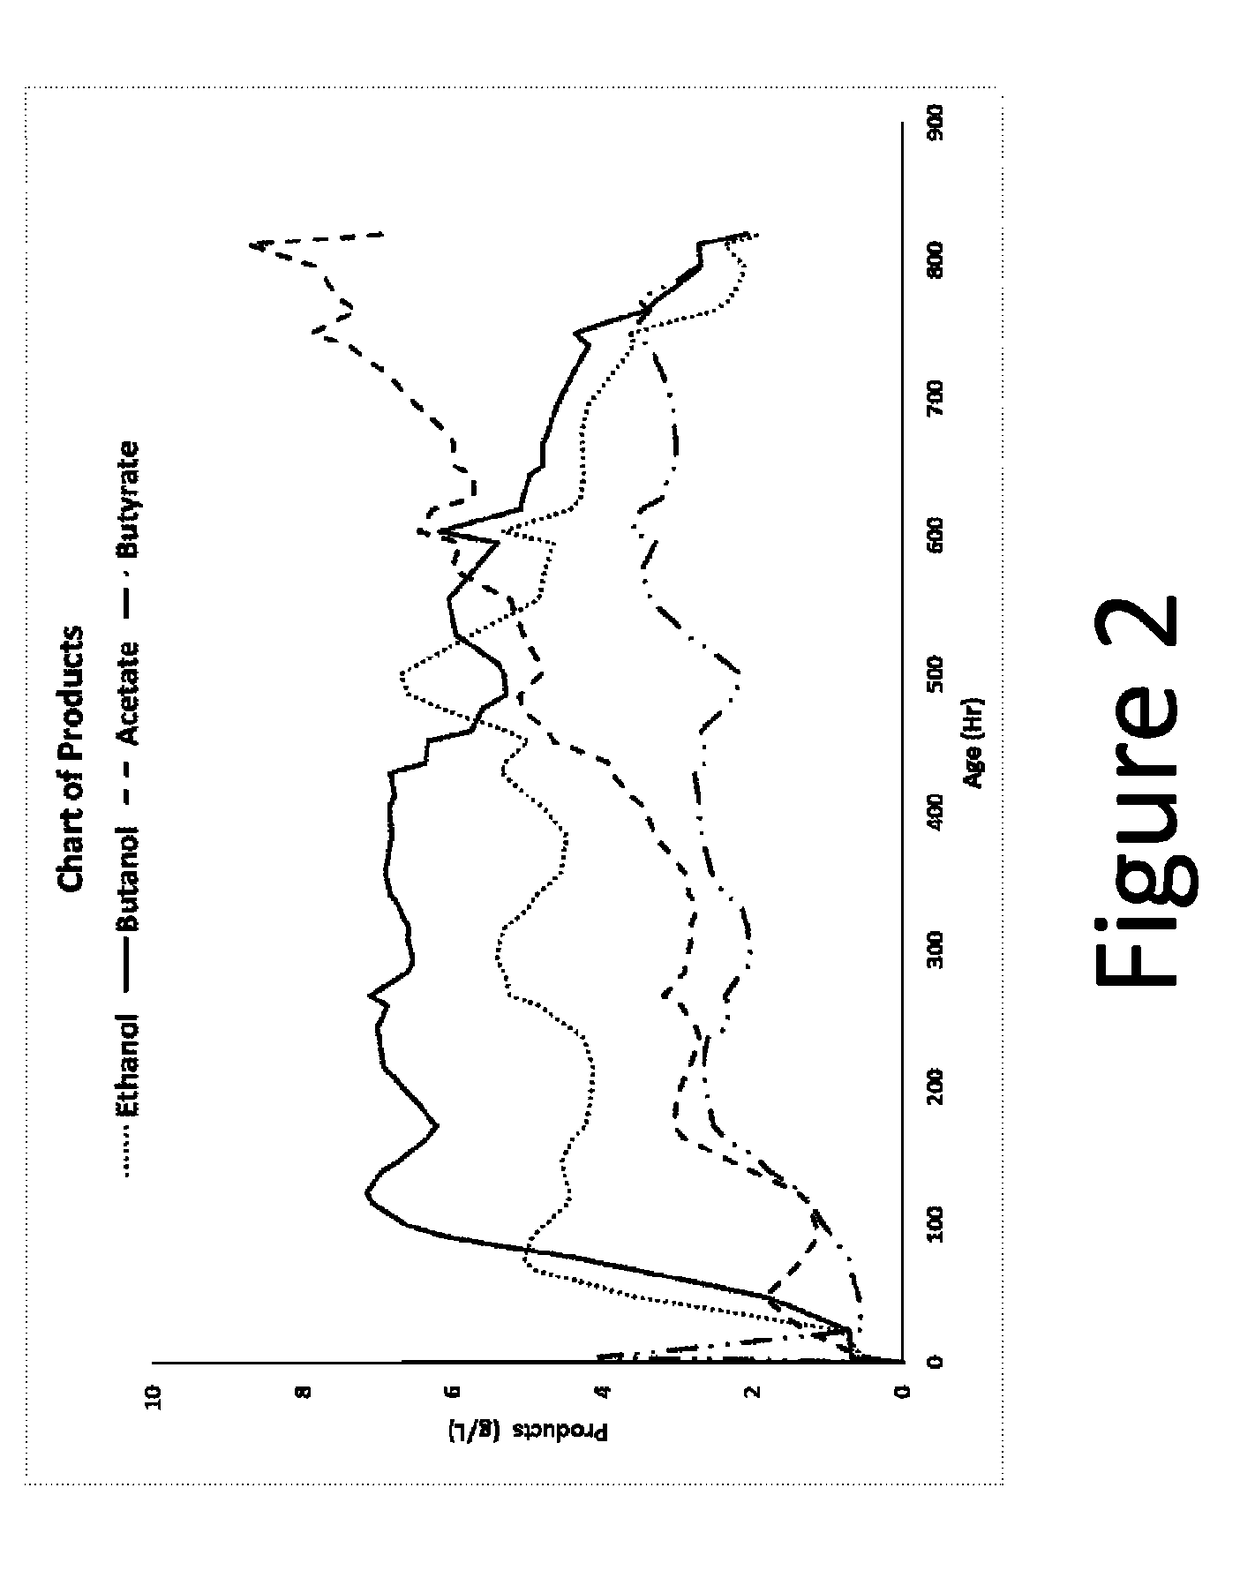 Method for producing C4 oxygentates by fermentation using high oxidation state sulfur